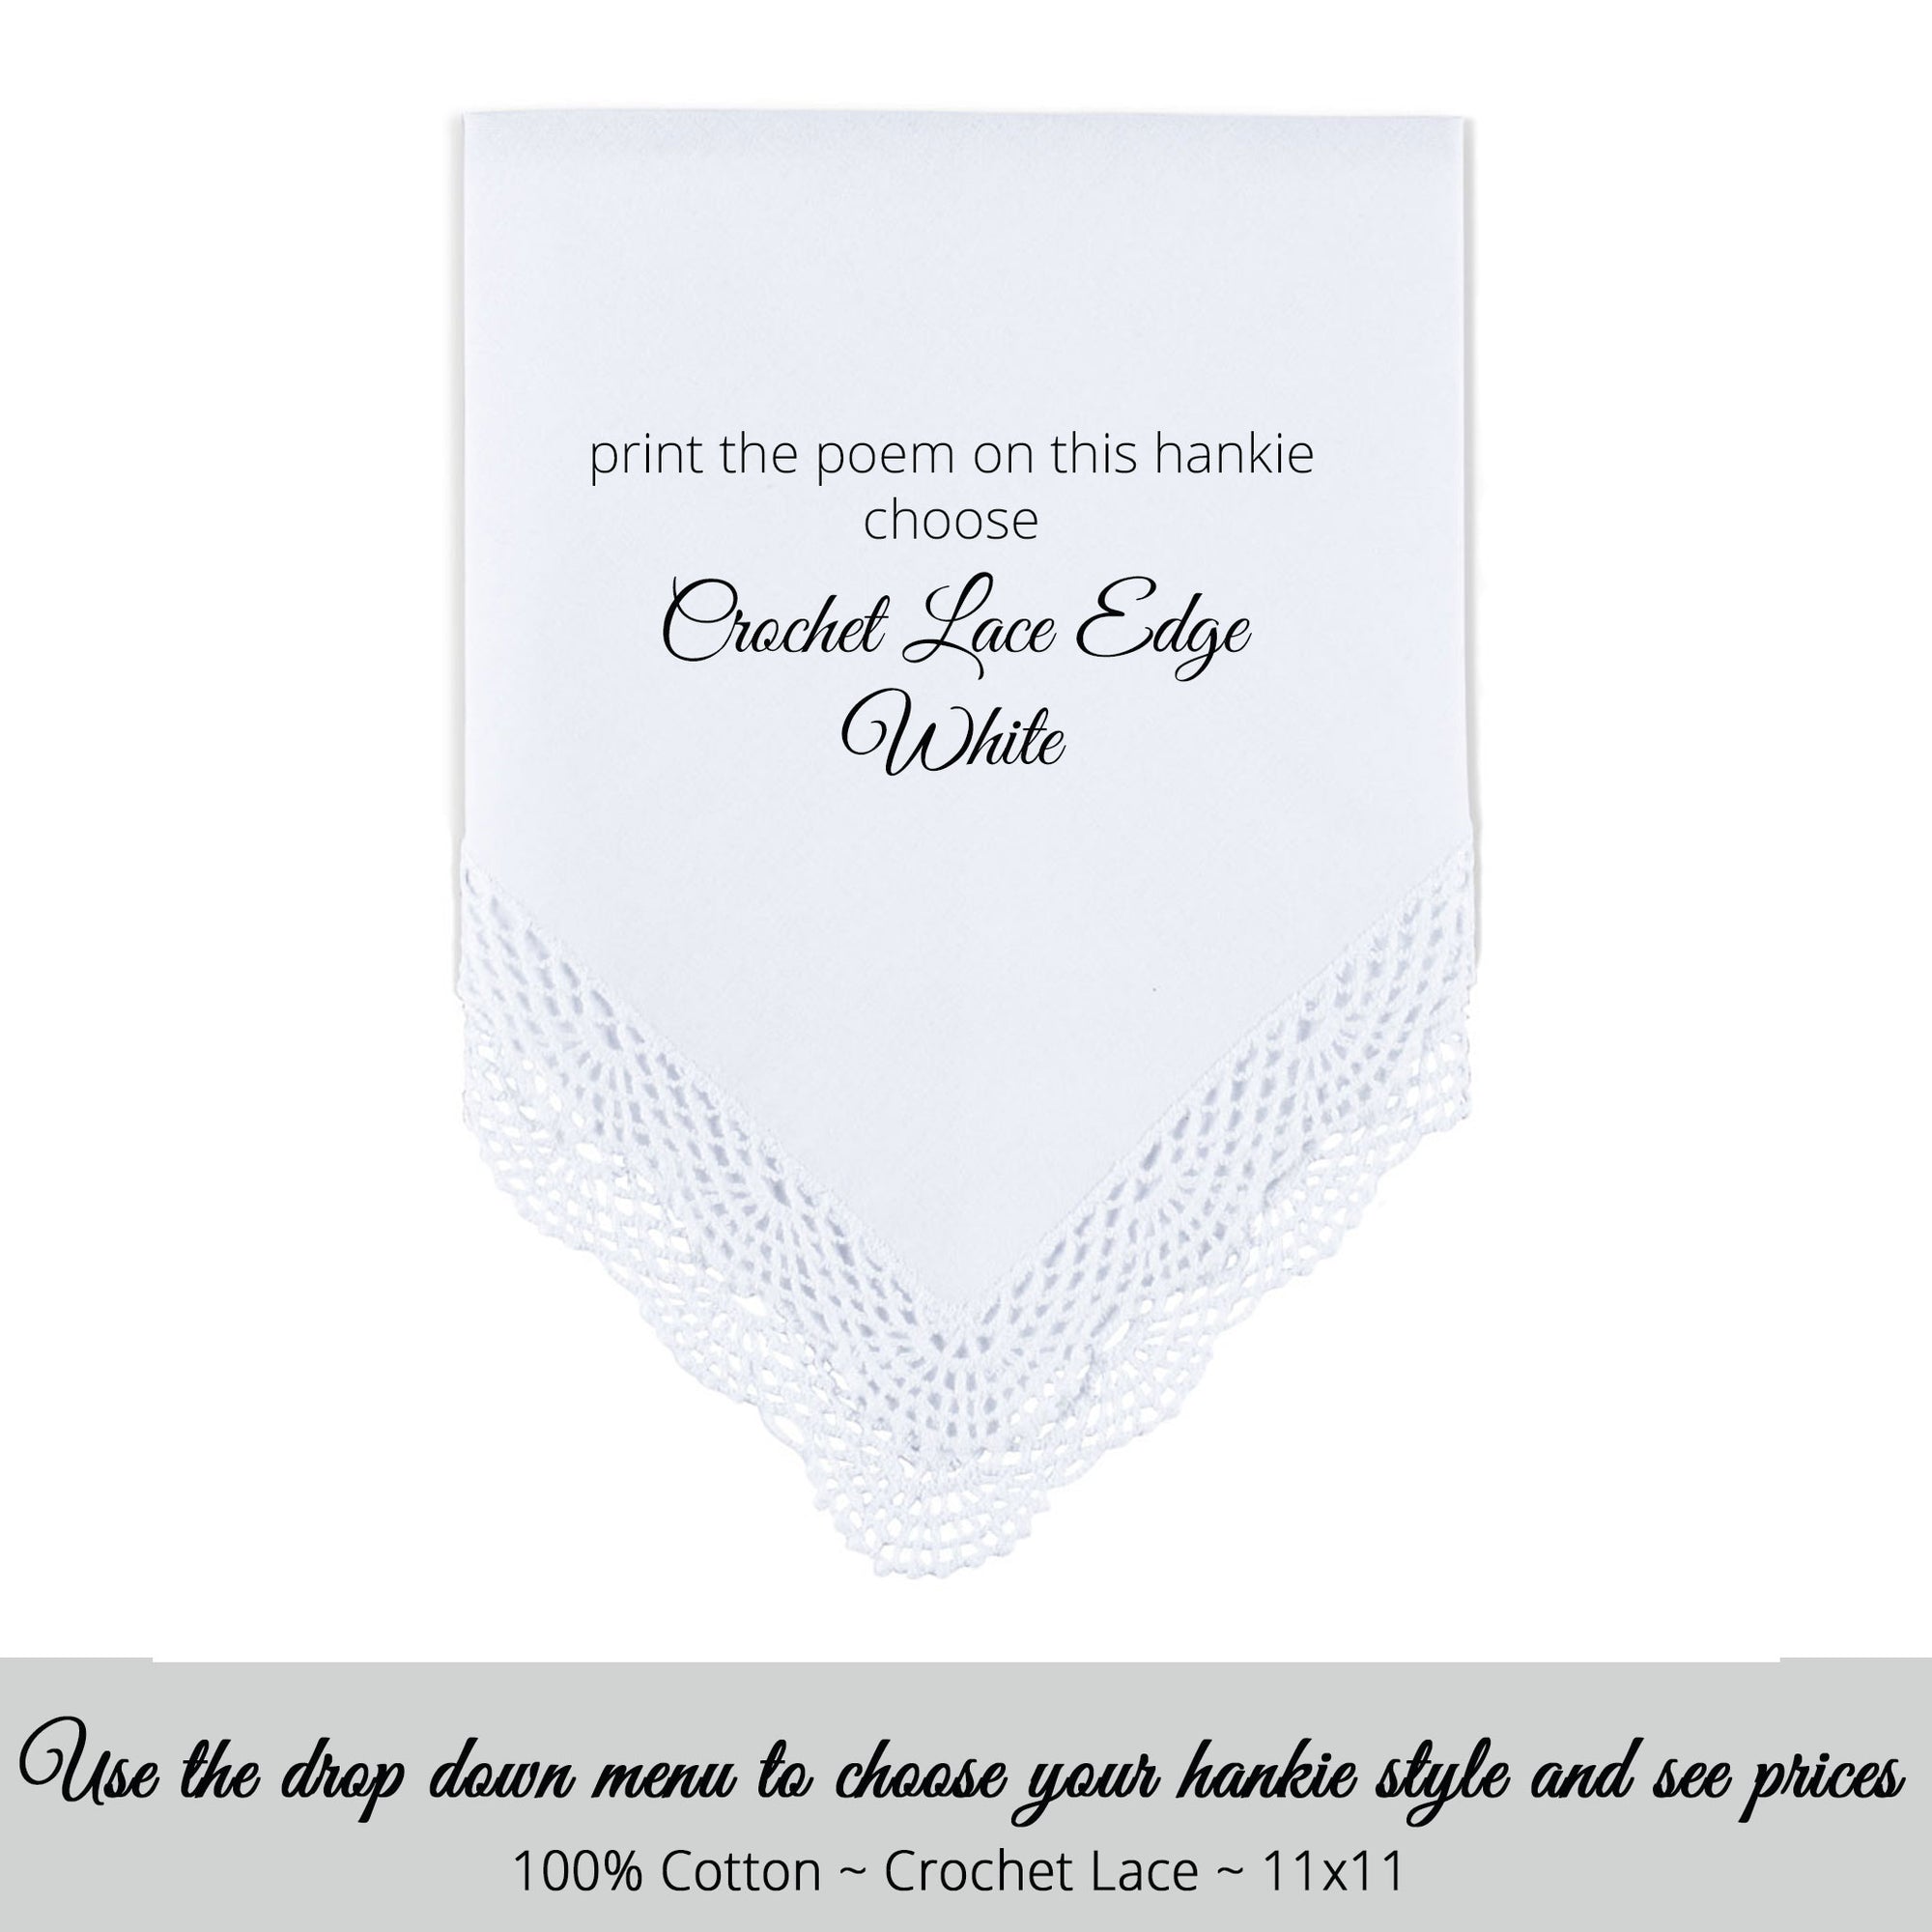 Wedding handkerchief white with crochet lace edge poem printed hankie for the sister in law bridesmaid